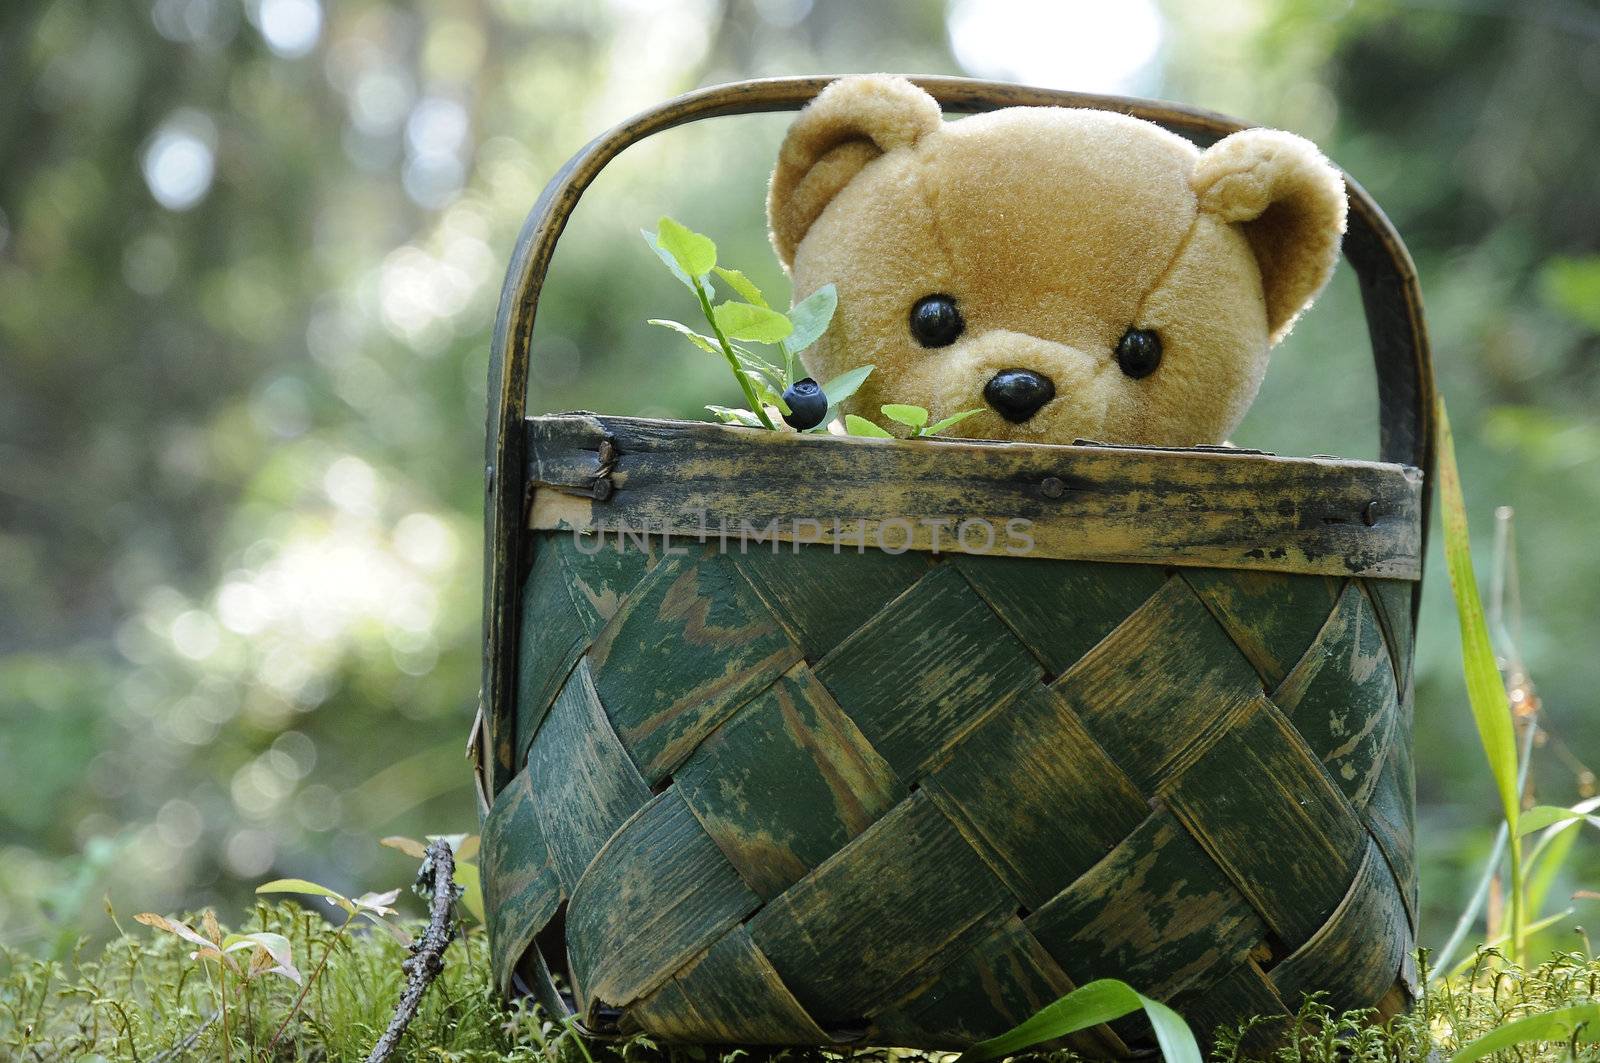 A teddy bear sitting in a braided green basket out there in the forest